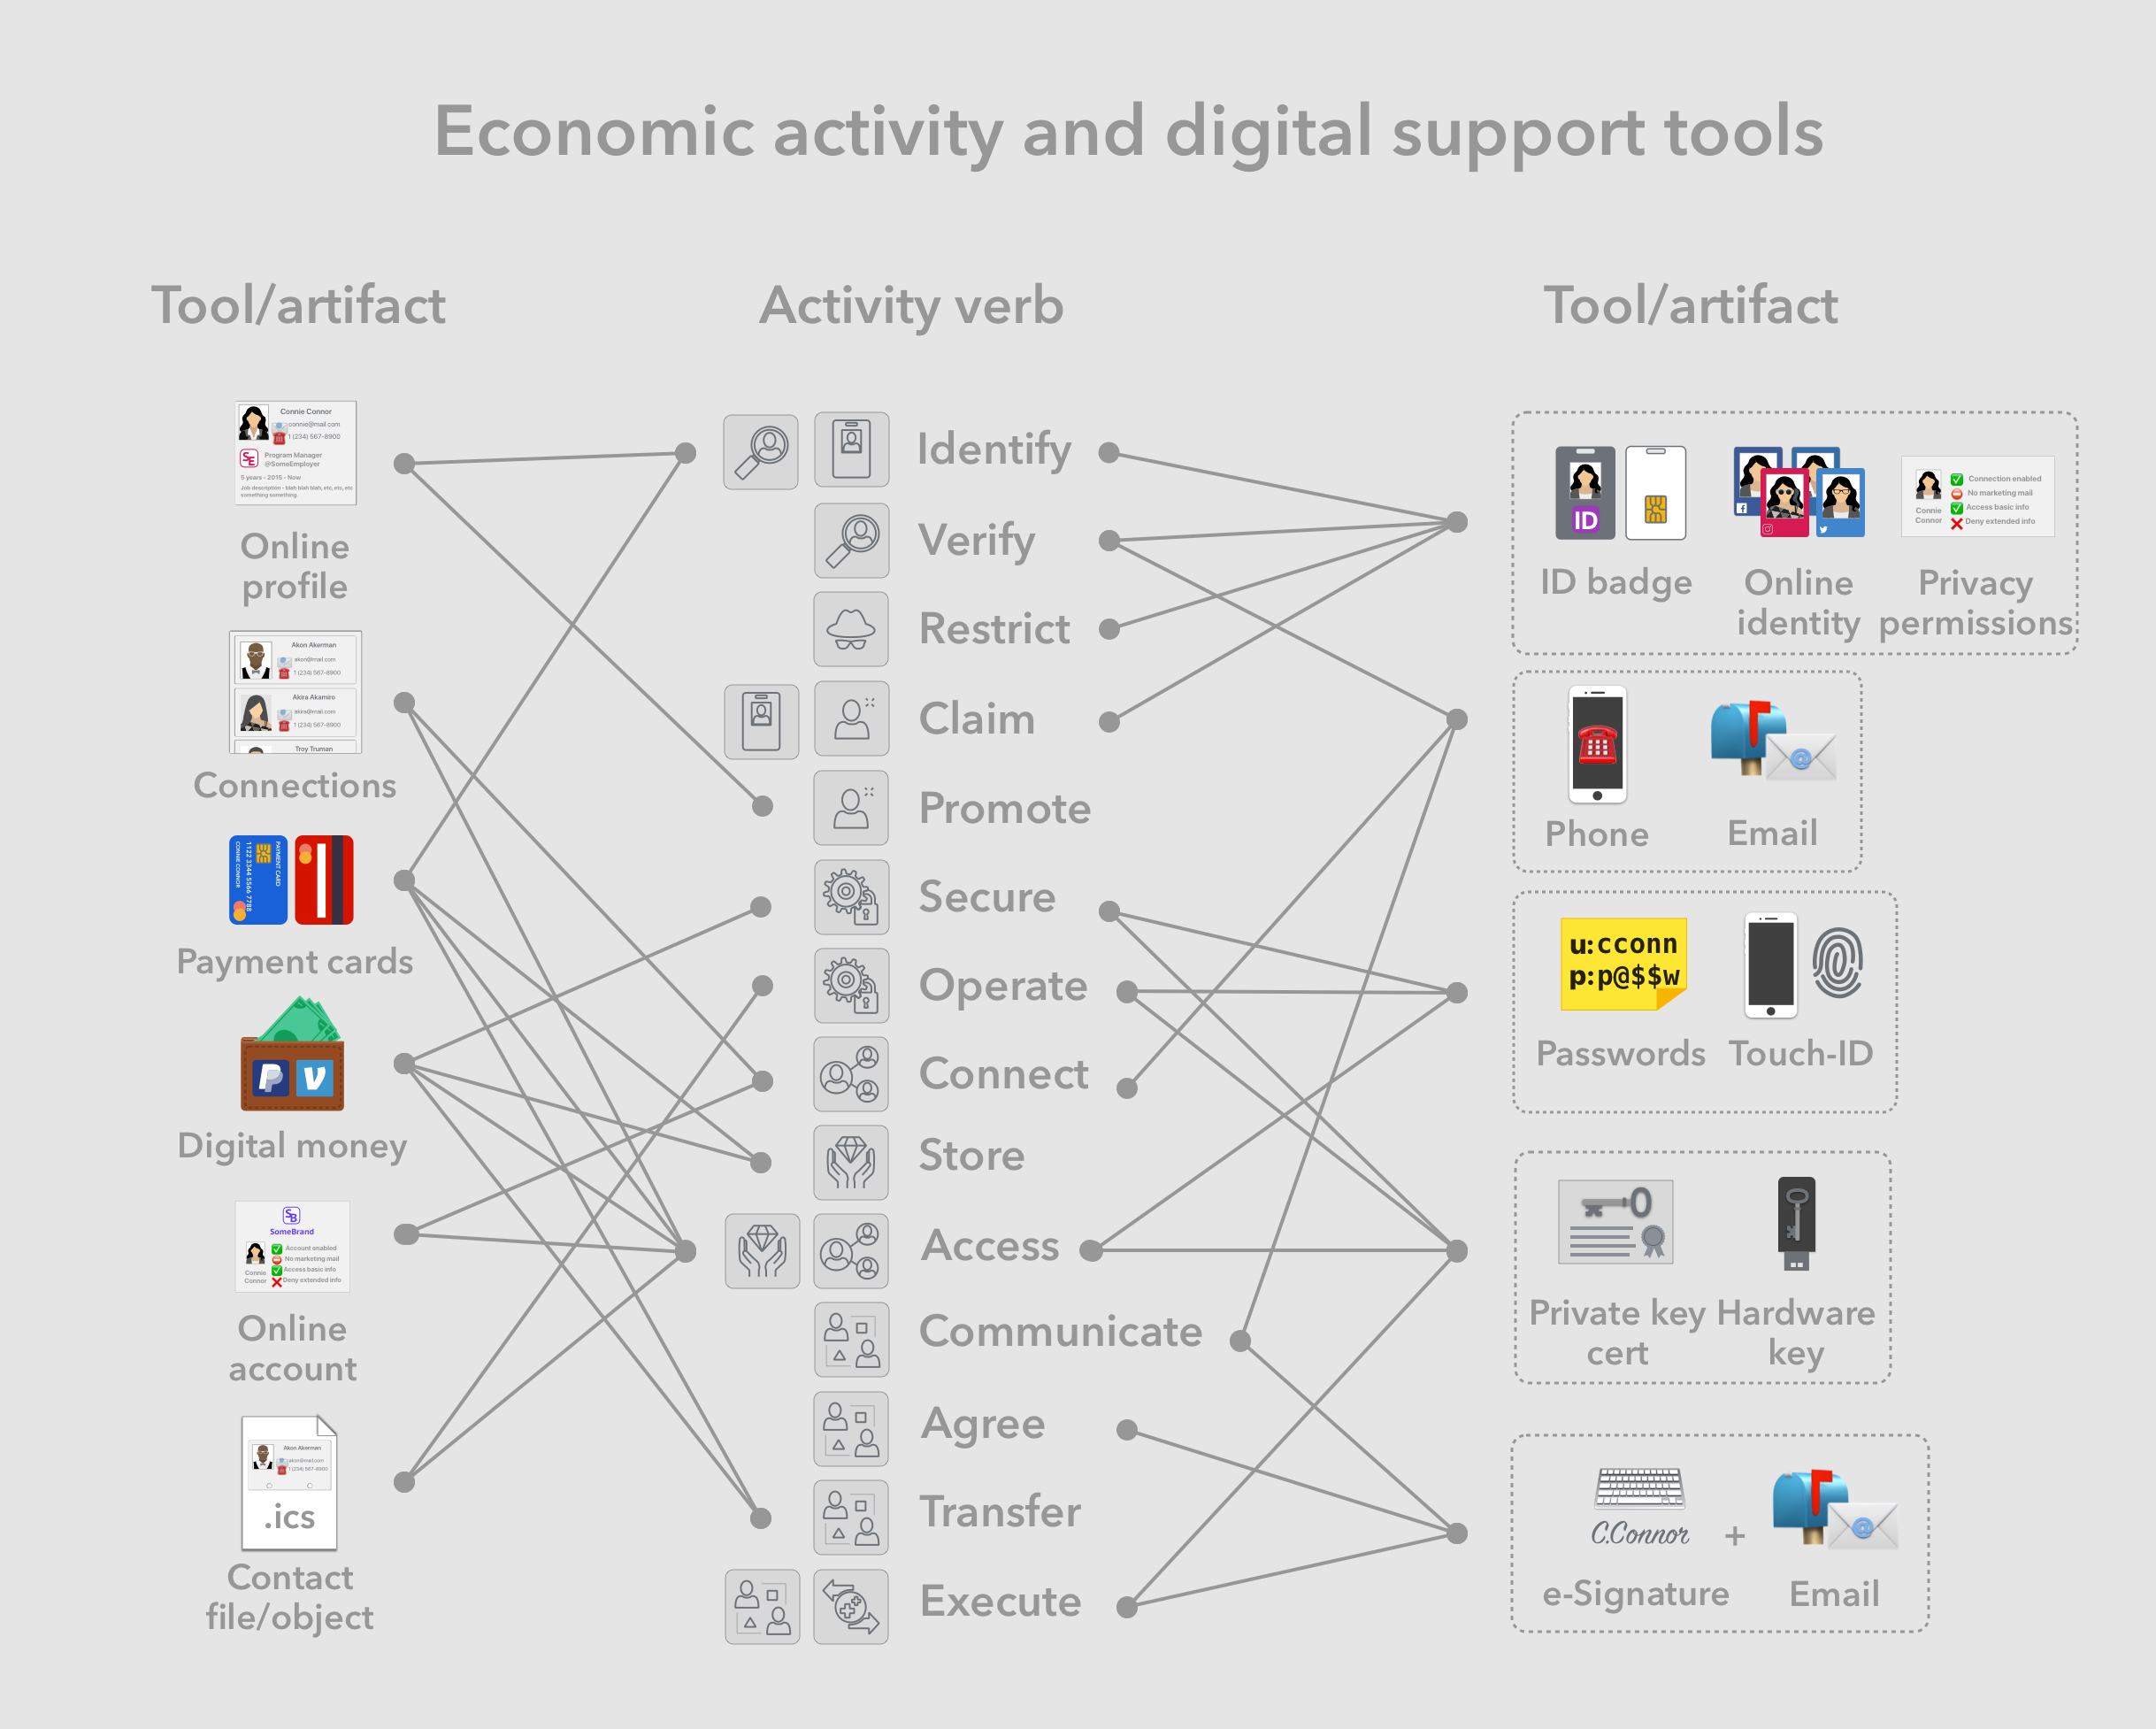 Economic activity and digital support tools